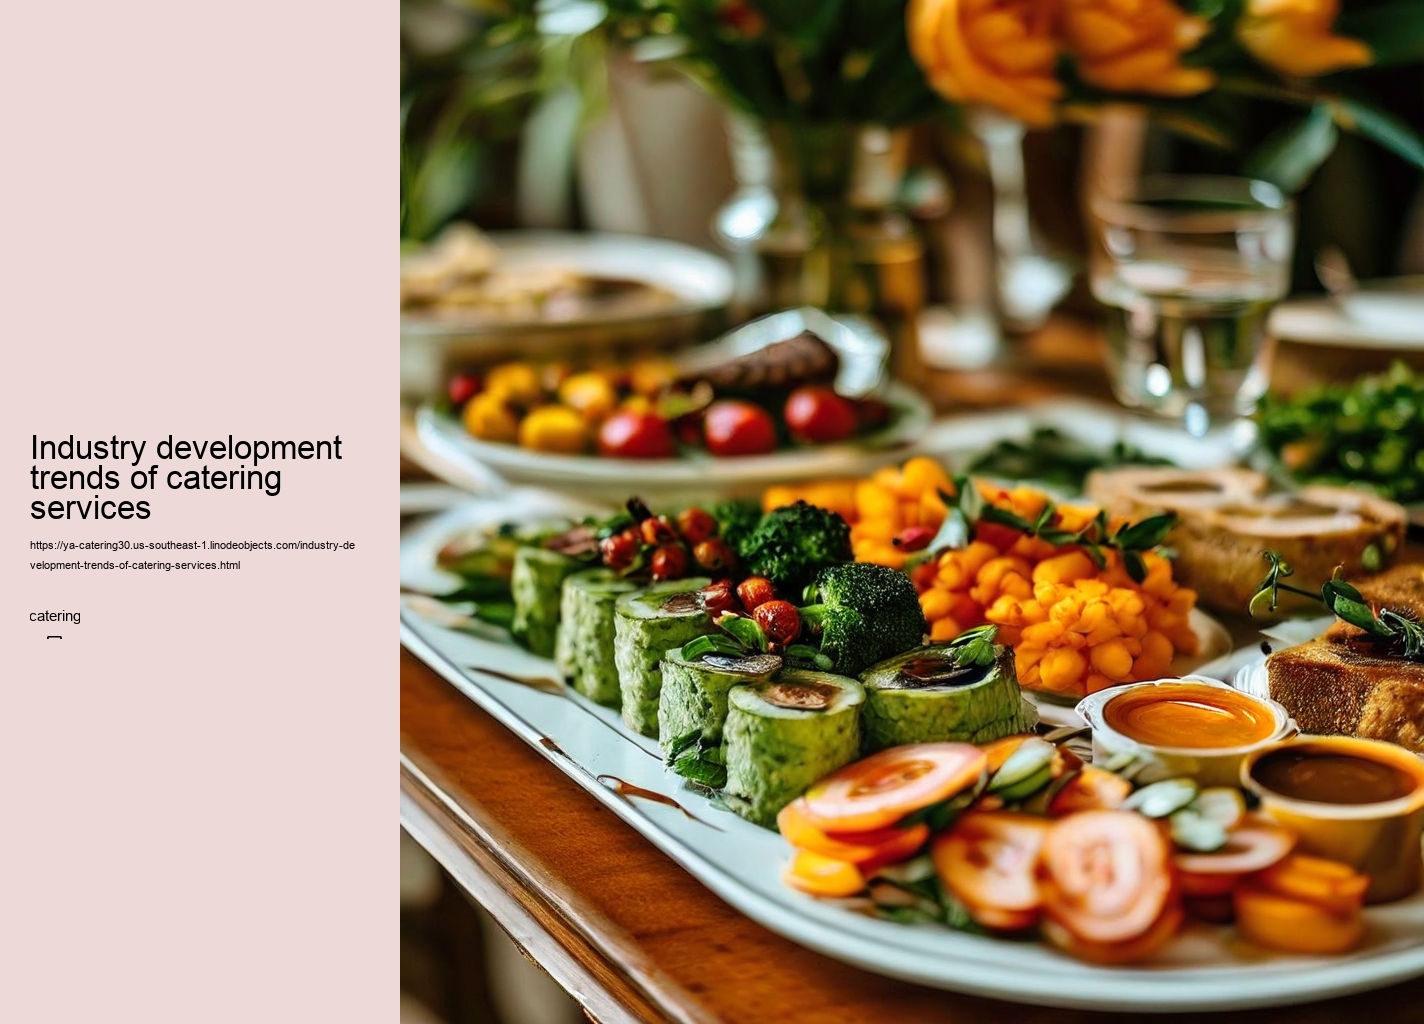 Industry development trends of catering services